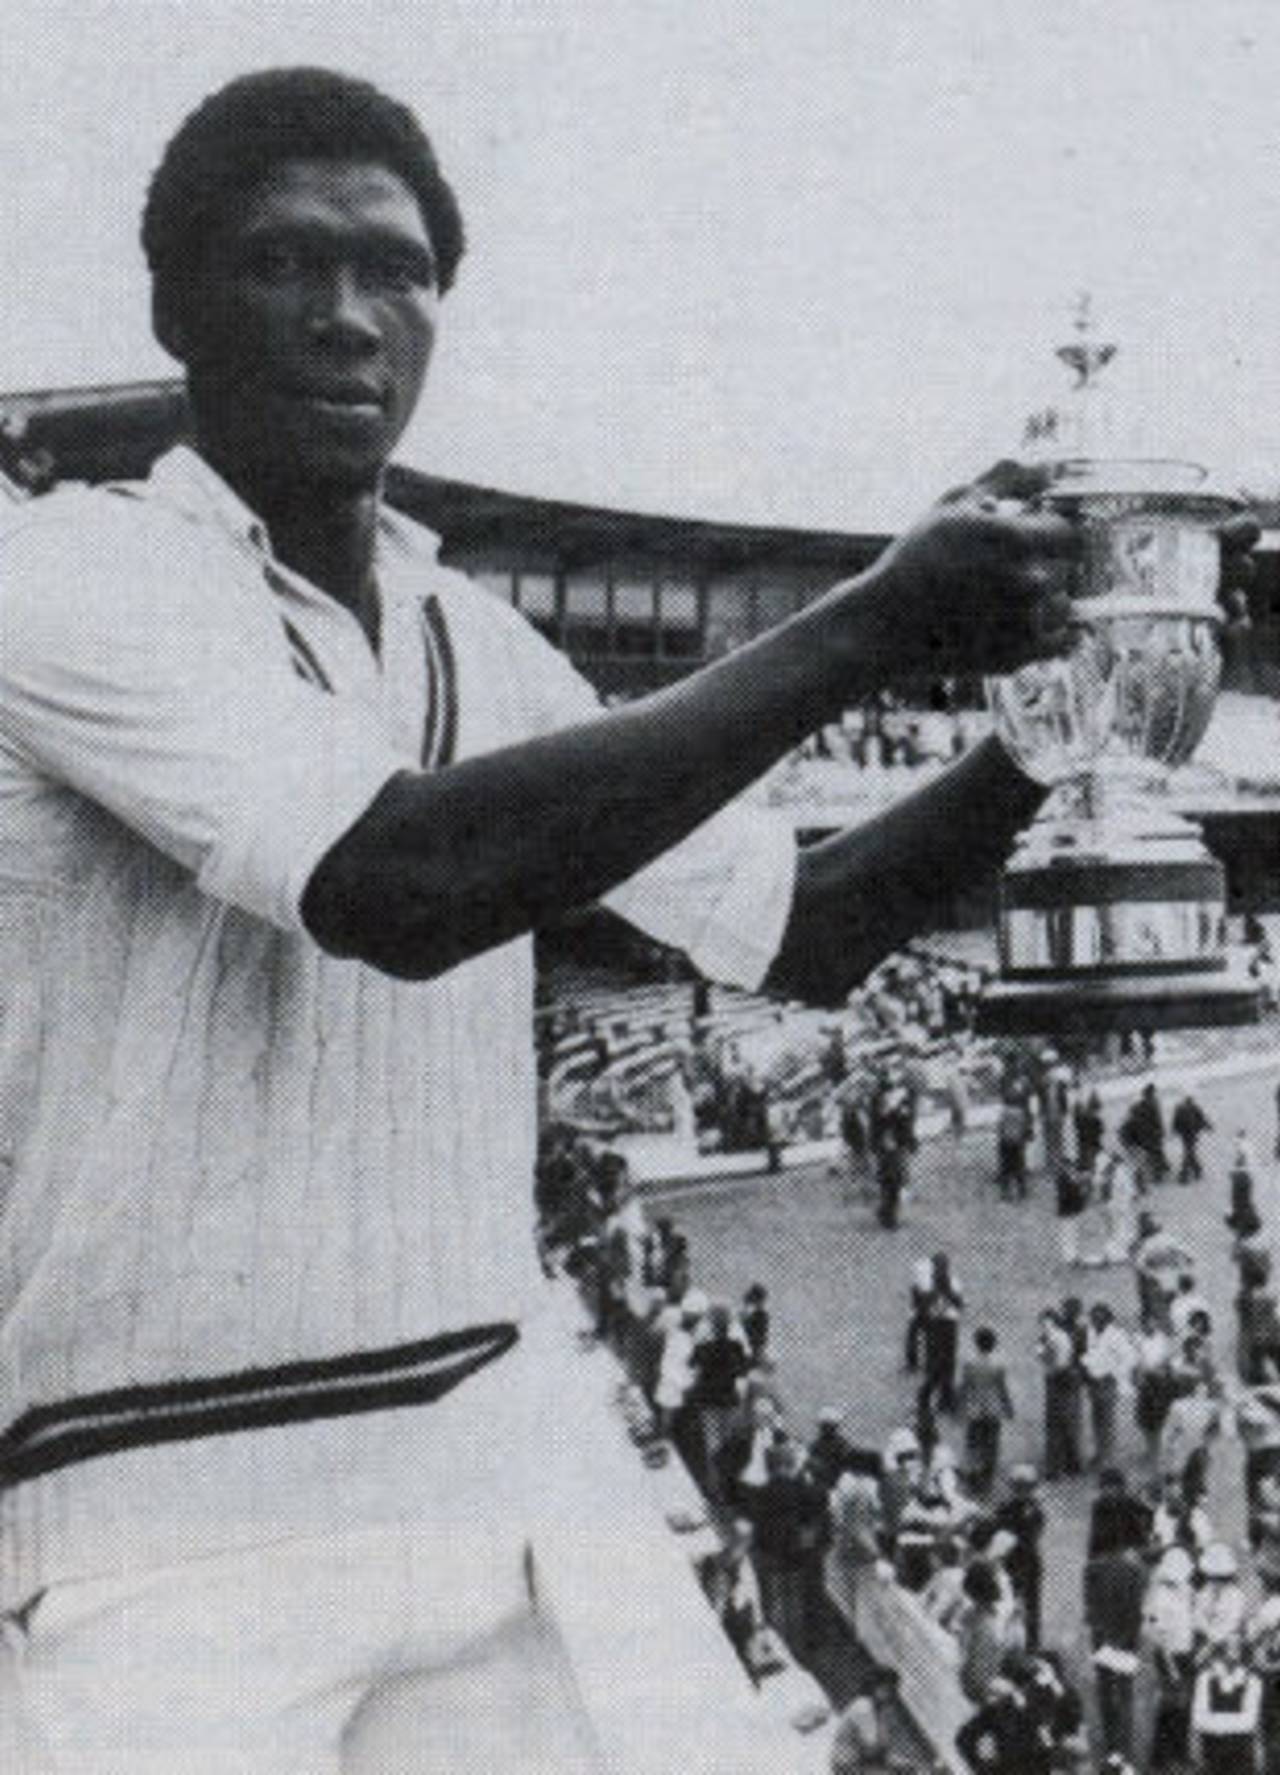 Joel Garner with the World Cup - his 5 for 38 helped West Indies to victory, West Indies v England, Lord's, June 23, 1979